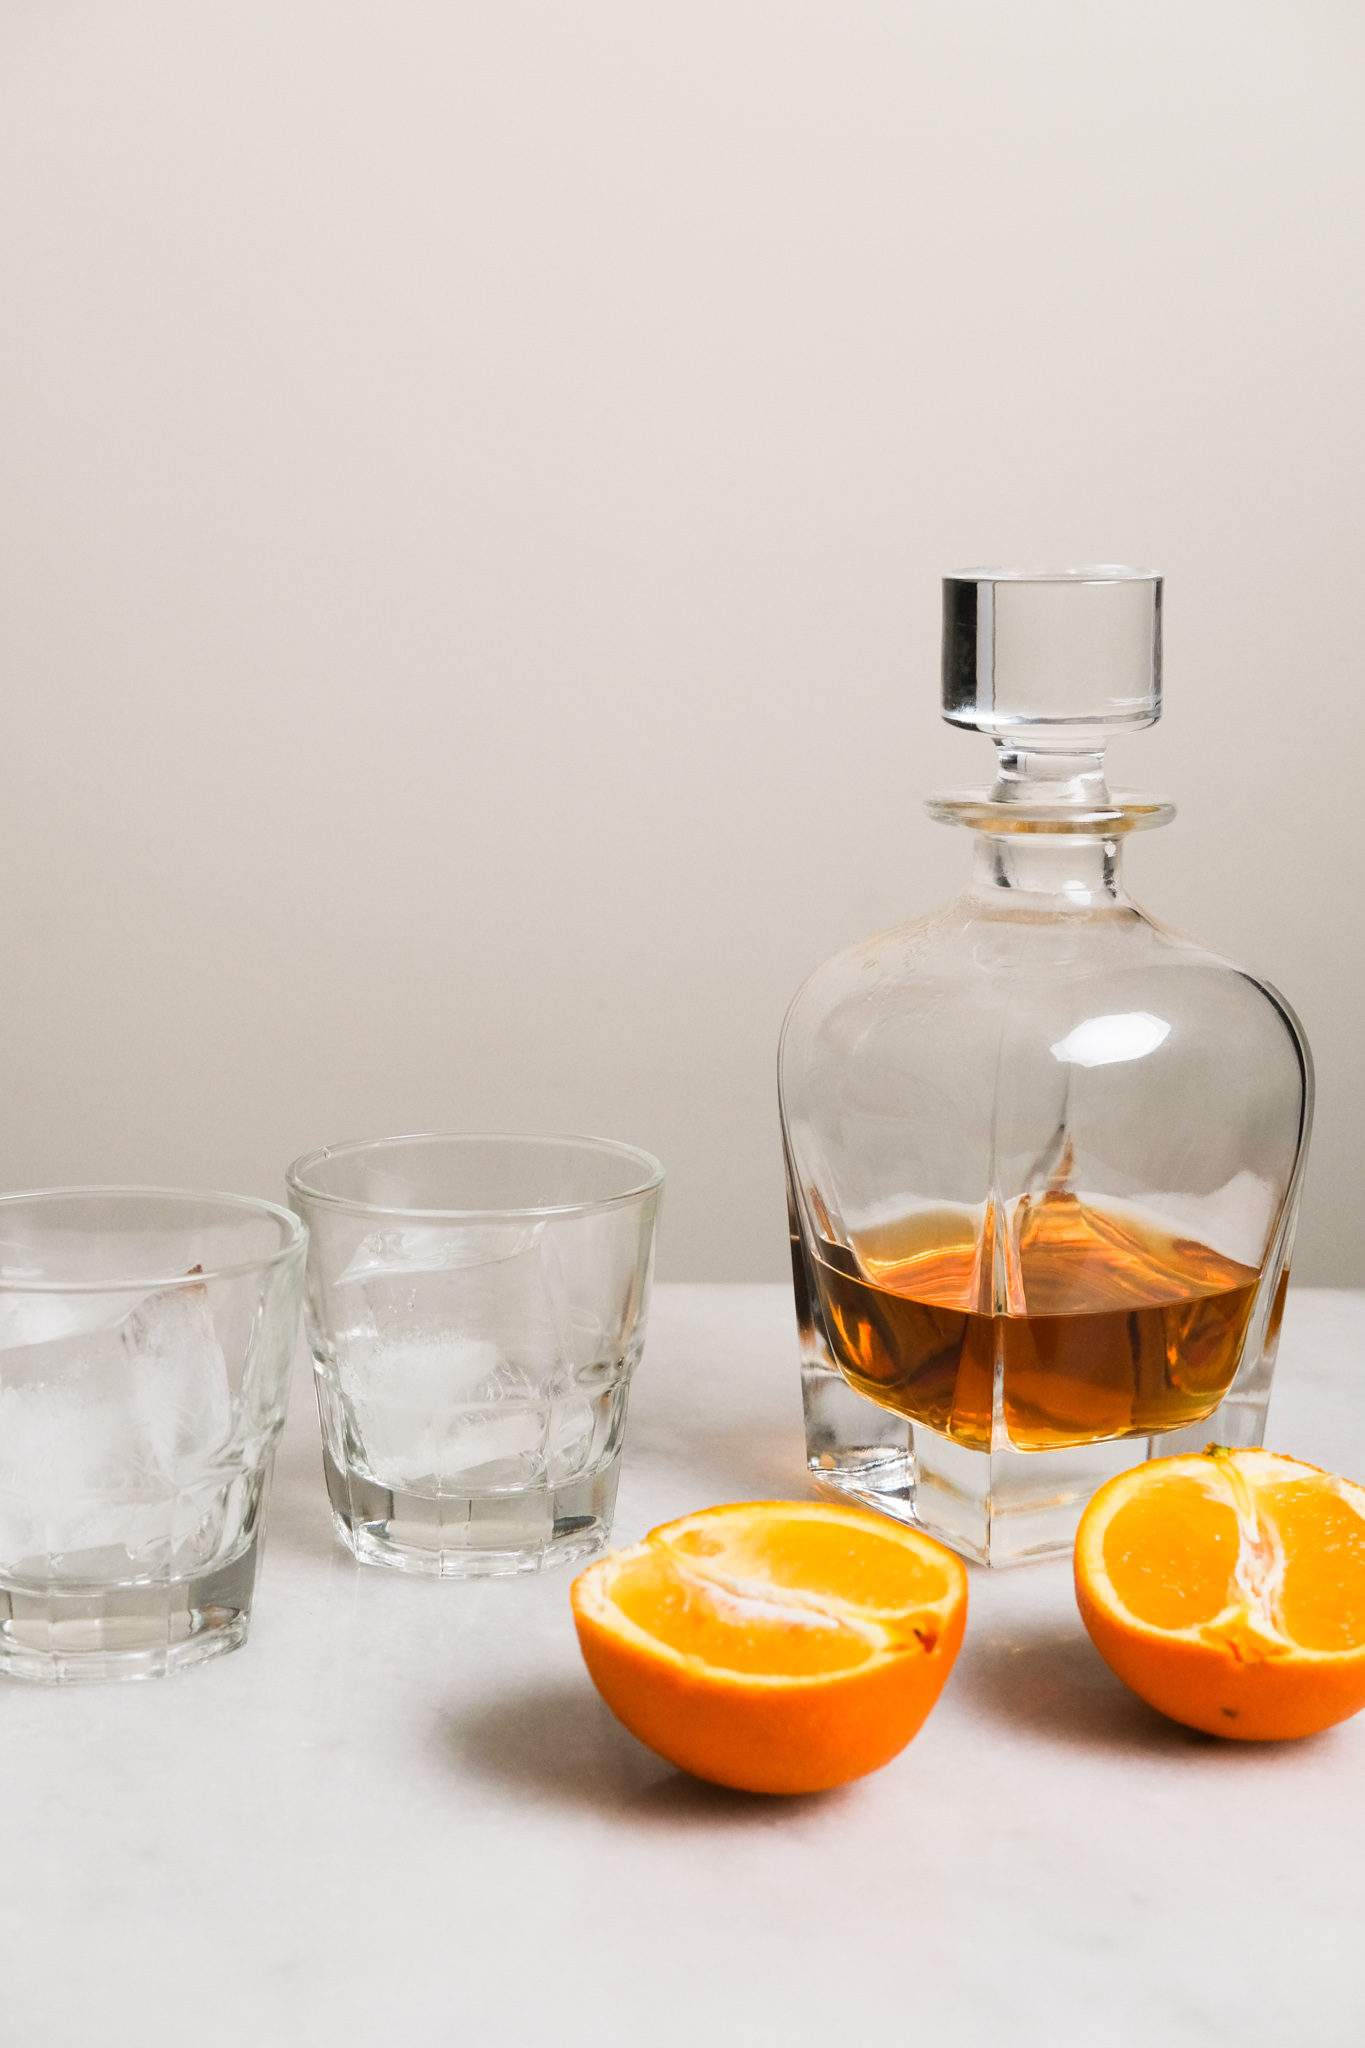 setting up to make an orange whiskey sours